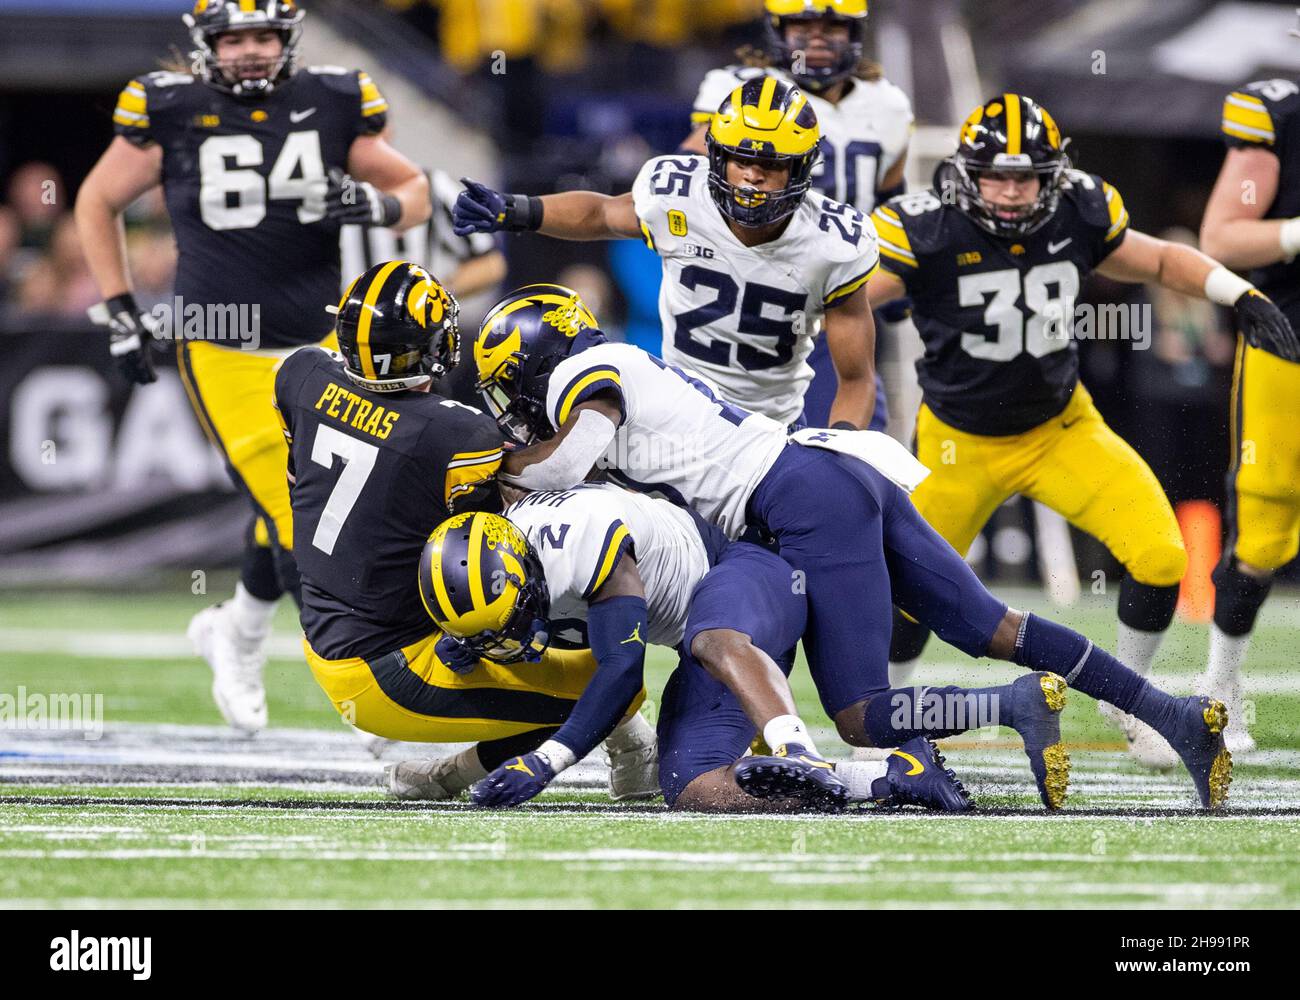 Indianapolis, Indiana, USA. 04th Dec, 2021. Michigan linebacker Josh Ross (12) and Michigan defensive back Brad Hawkins (2) make the tackle on Iowa quarterback Spencer Petras (7) during NCAA Football game action between the Michigan Wolverines and the Iowa Hawkeyes at Lucas Oil Stadium in Indianapolis, Indiana. Michigan defeated Iowa 42-3. John Mersits/CSM/Alamy Live News Stock Photo